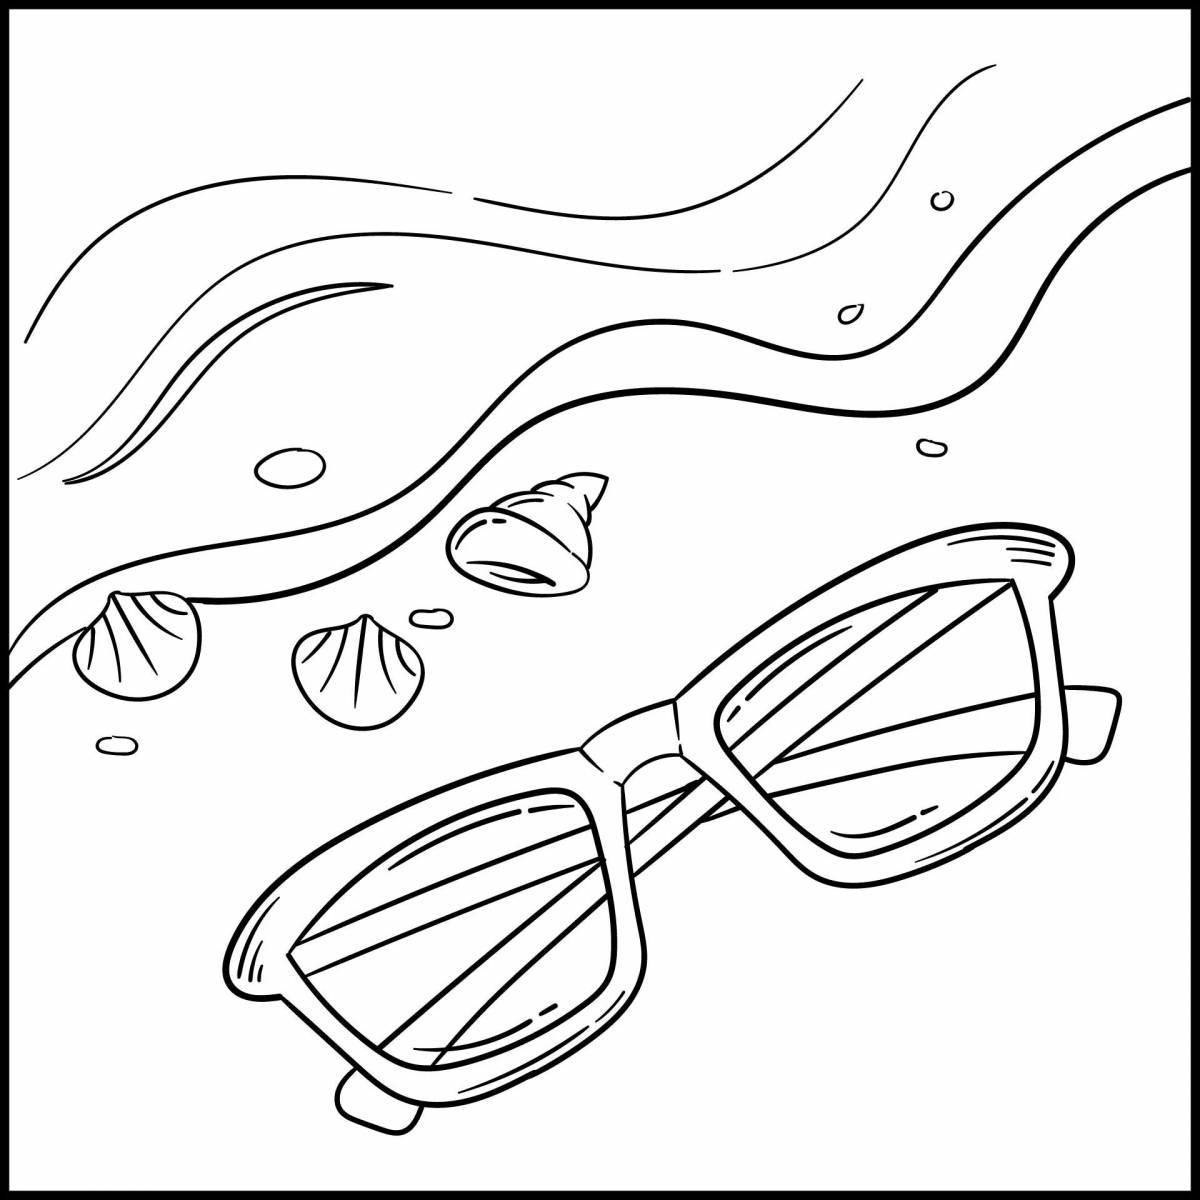 Outstanding glasses coloring book for preschoolers